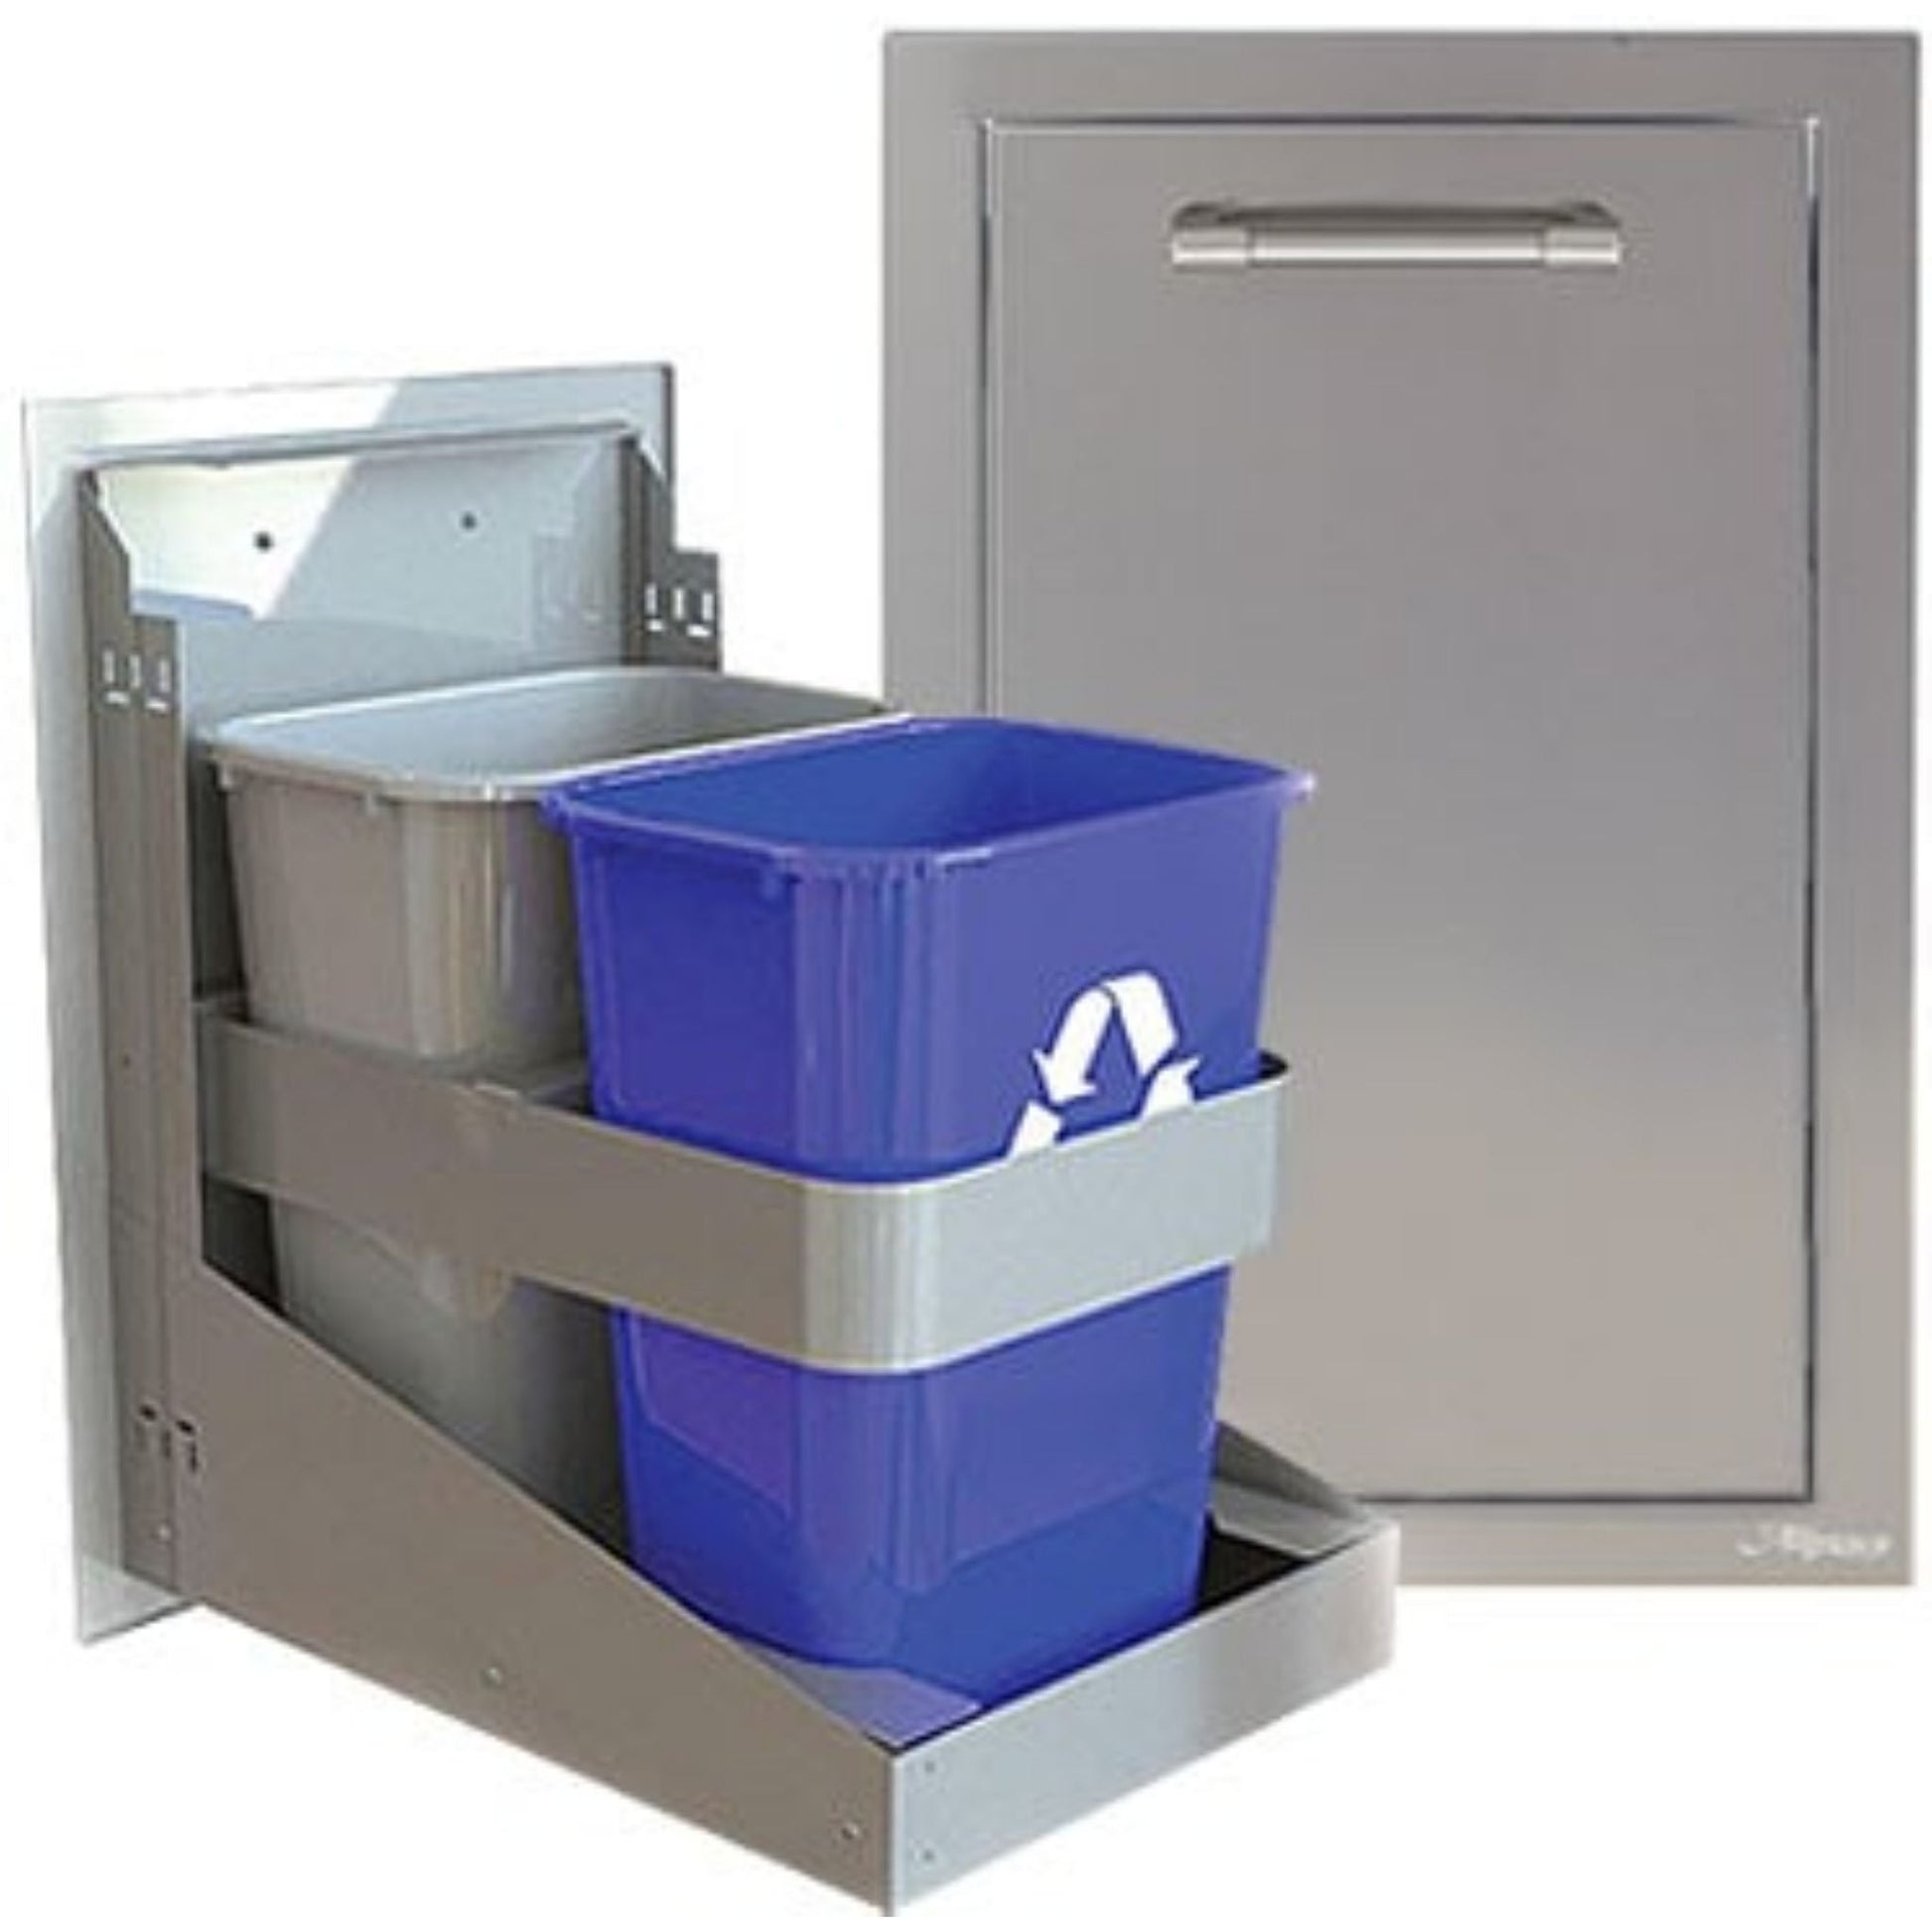 Alfresco 18" Stainless Steel Dual Trash Center / Recycling Drawer (Deep)